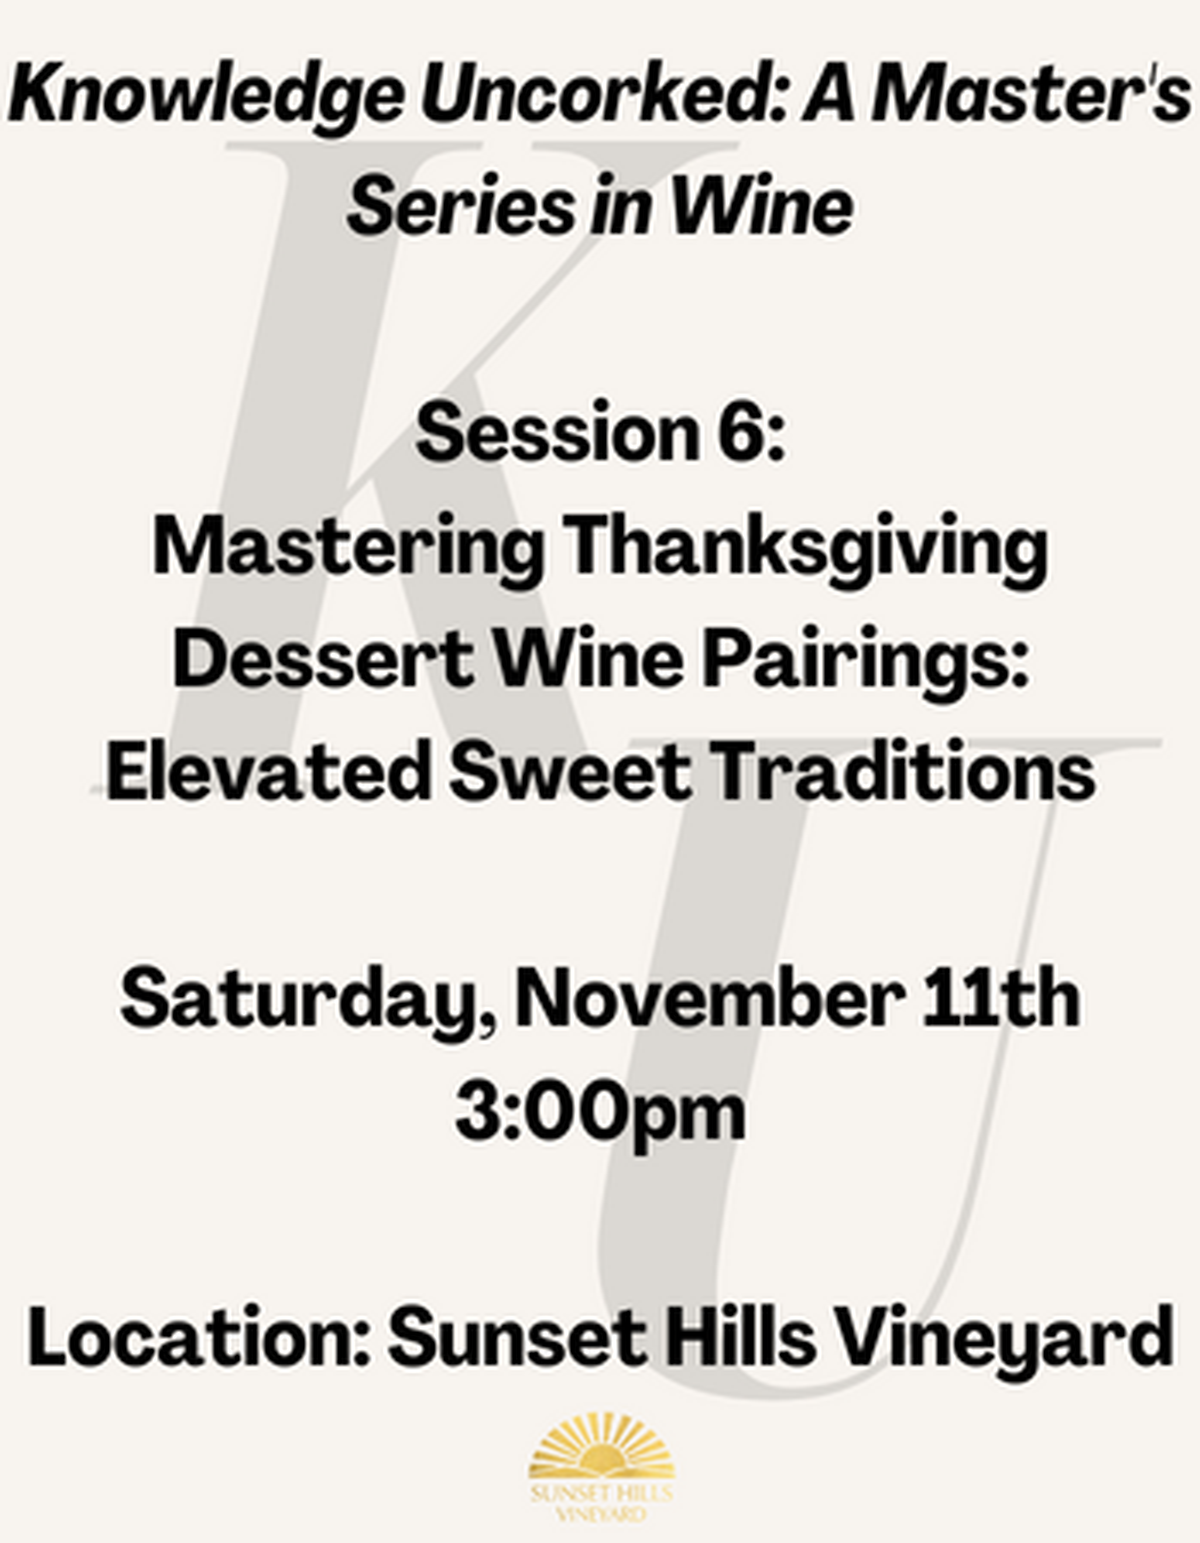 Mastering Thanksgiving Dessert Wine Pairings: Elevated Sweet Traditions (3:00pm)